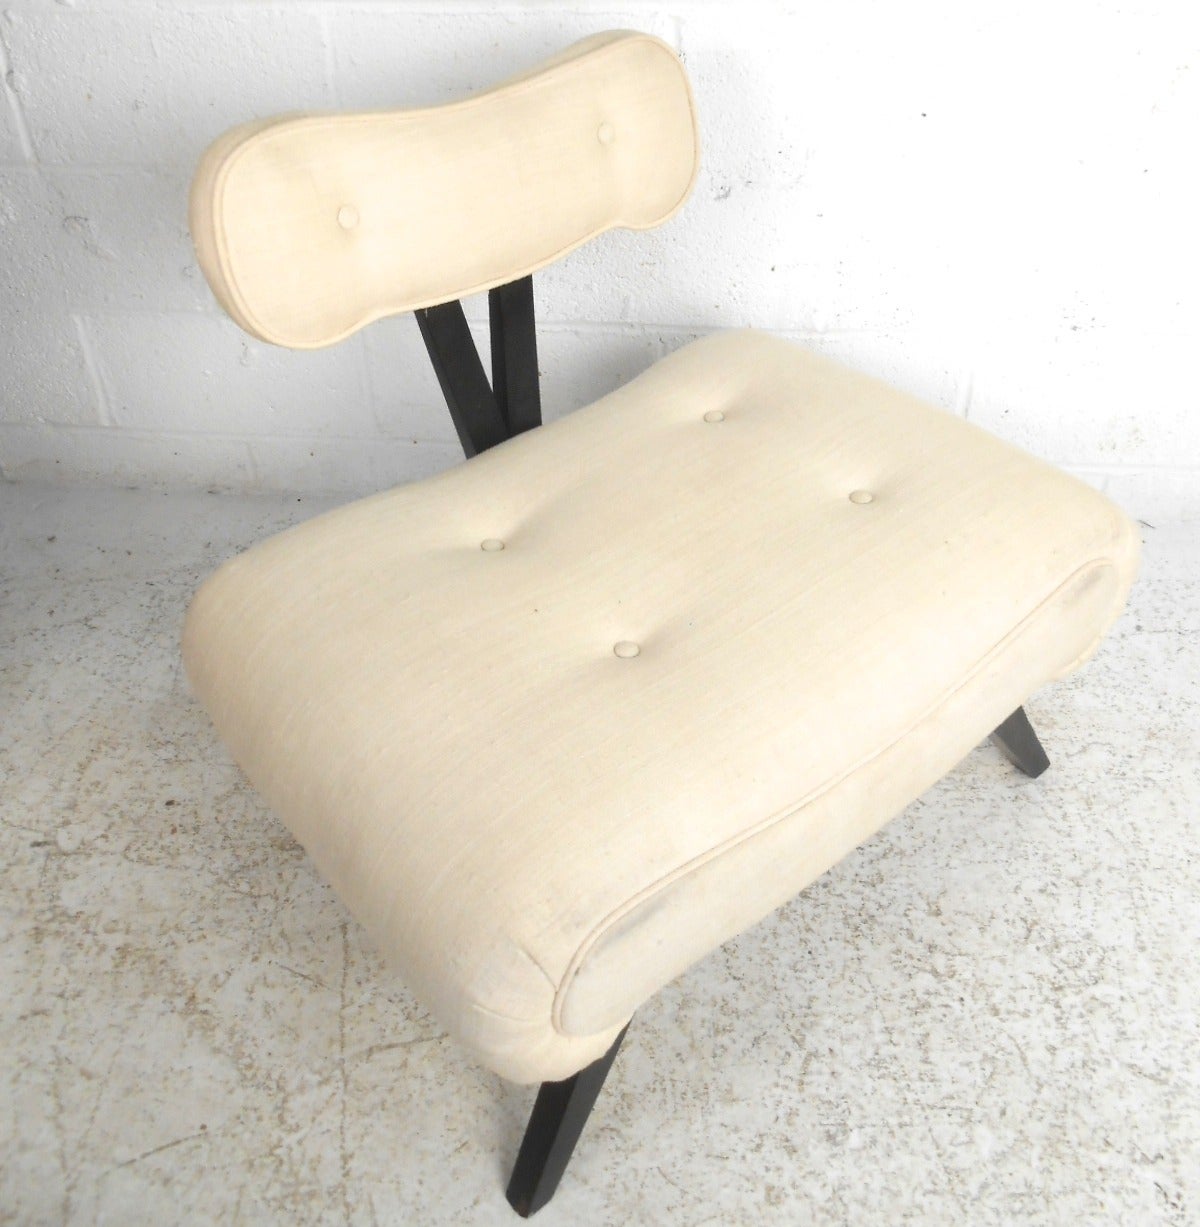 Unique Mid-Century Modern Hollywood Style Slipper Chair by Grosfeld House 1